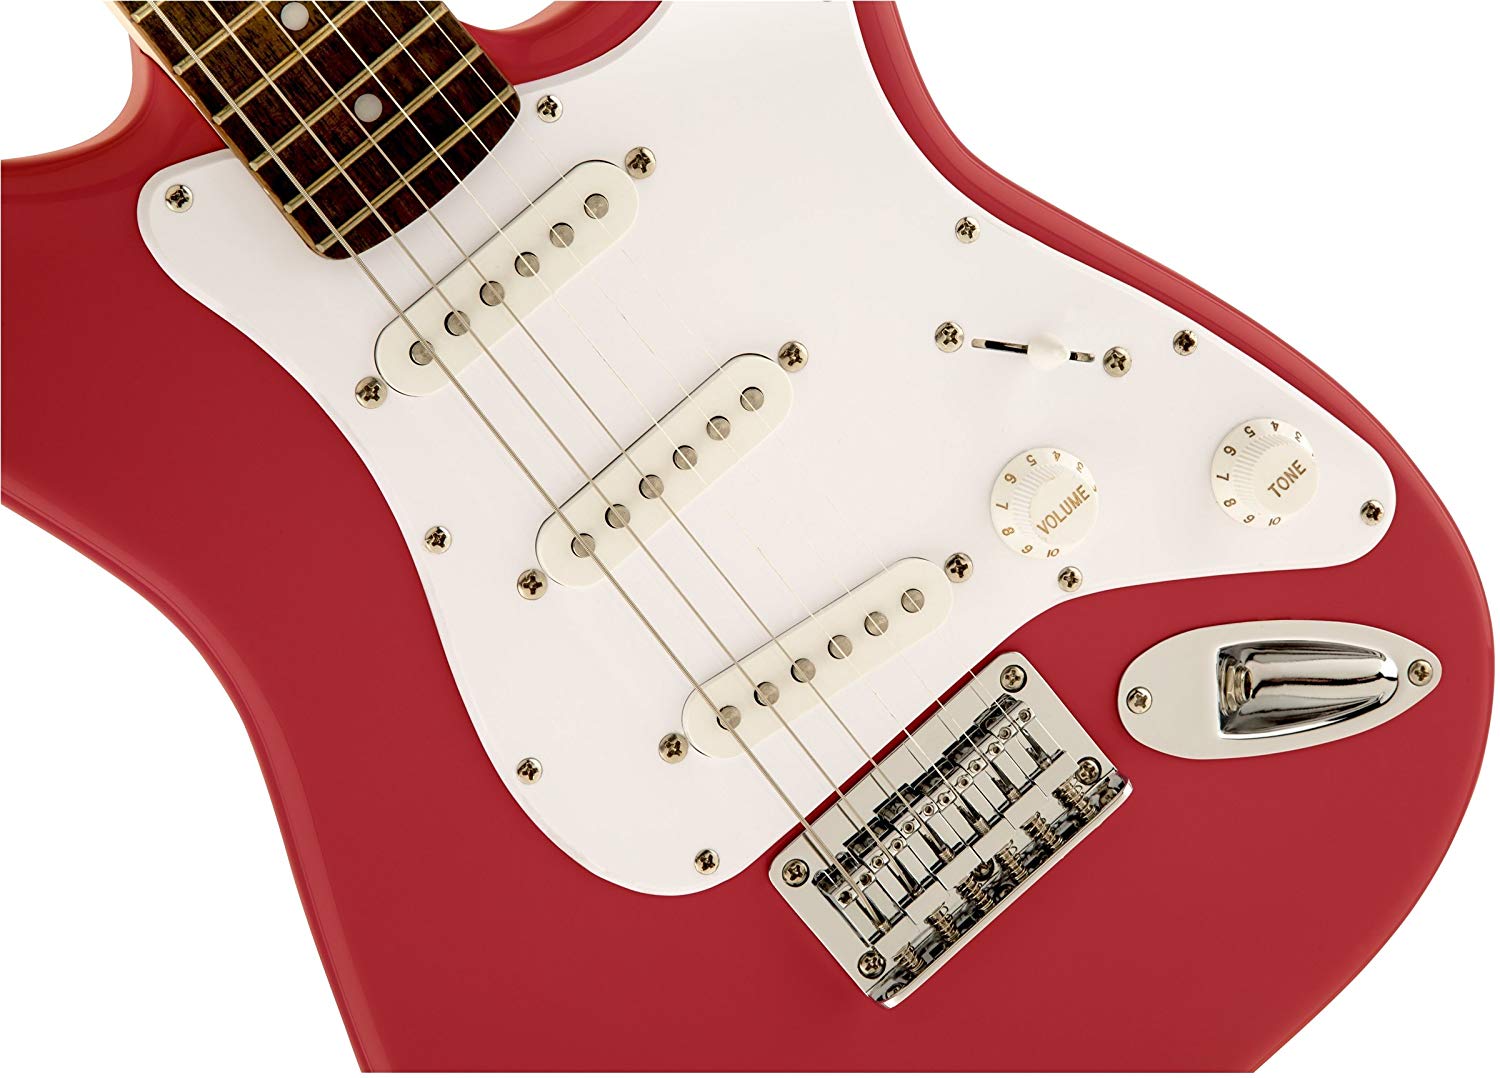 【FENDER SQUIRE mini】/ RED / ソフトケース付き